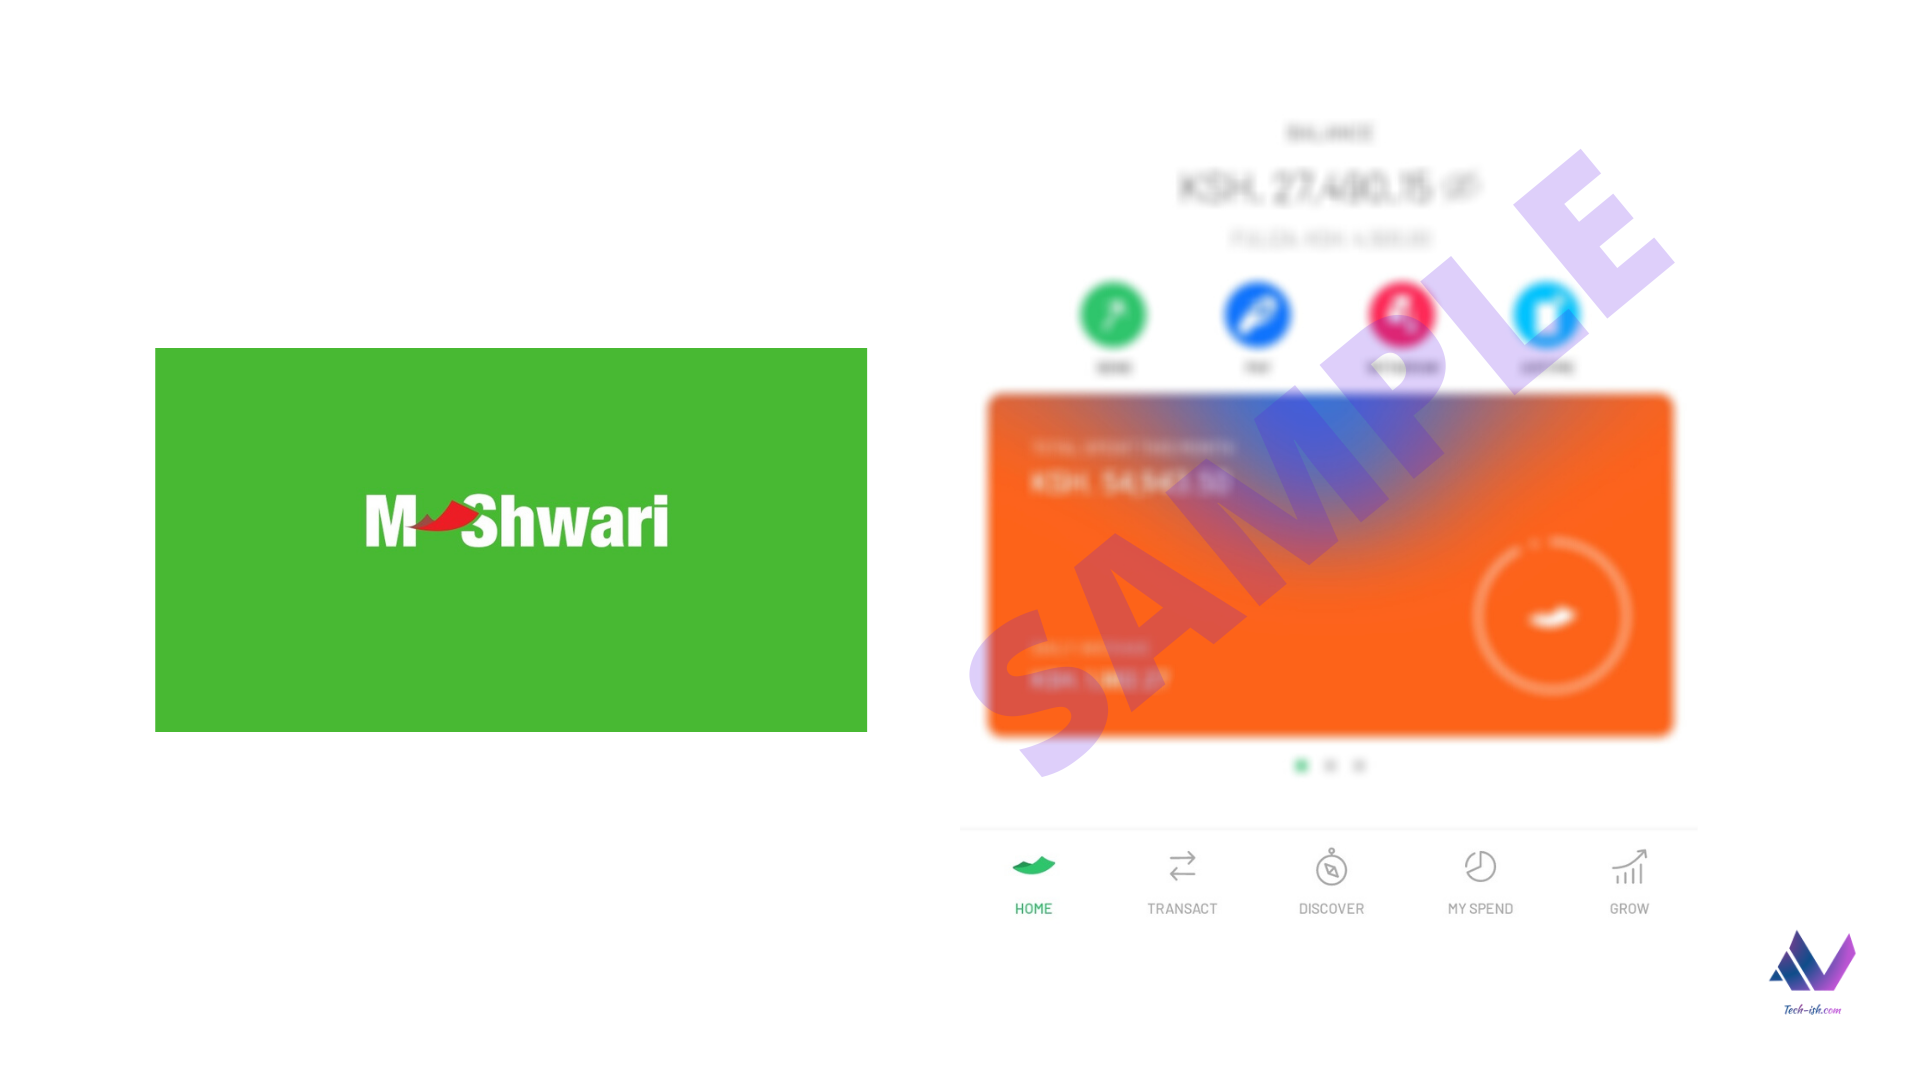 M-Shwari is now available on the NEW M-Pesa App